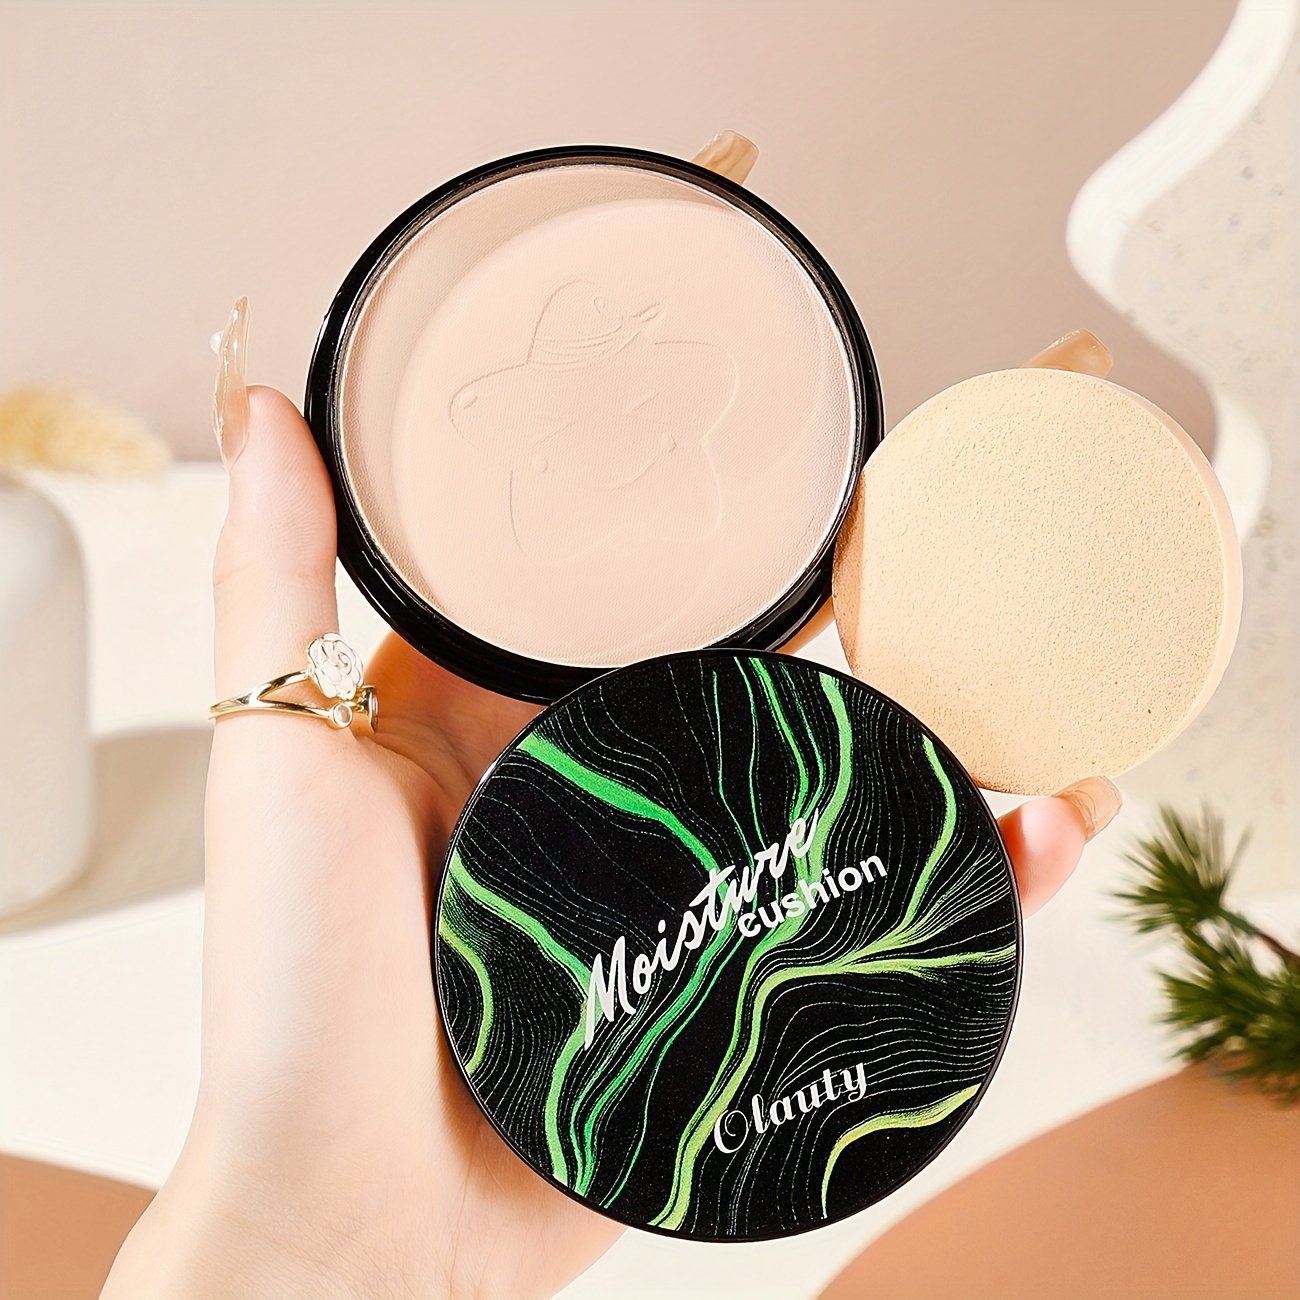 

3-in-1 Moisture Cushion Compact, Long-lasting Primer, Makeup Powder & Oil Control, Waterproof Concealer, Soft Mist Finish, Lightweight Breathable Coverage